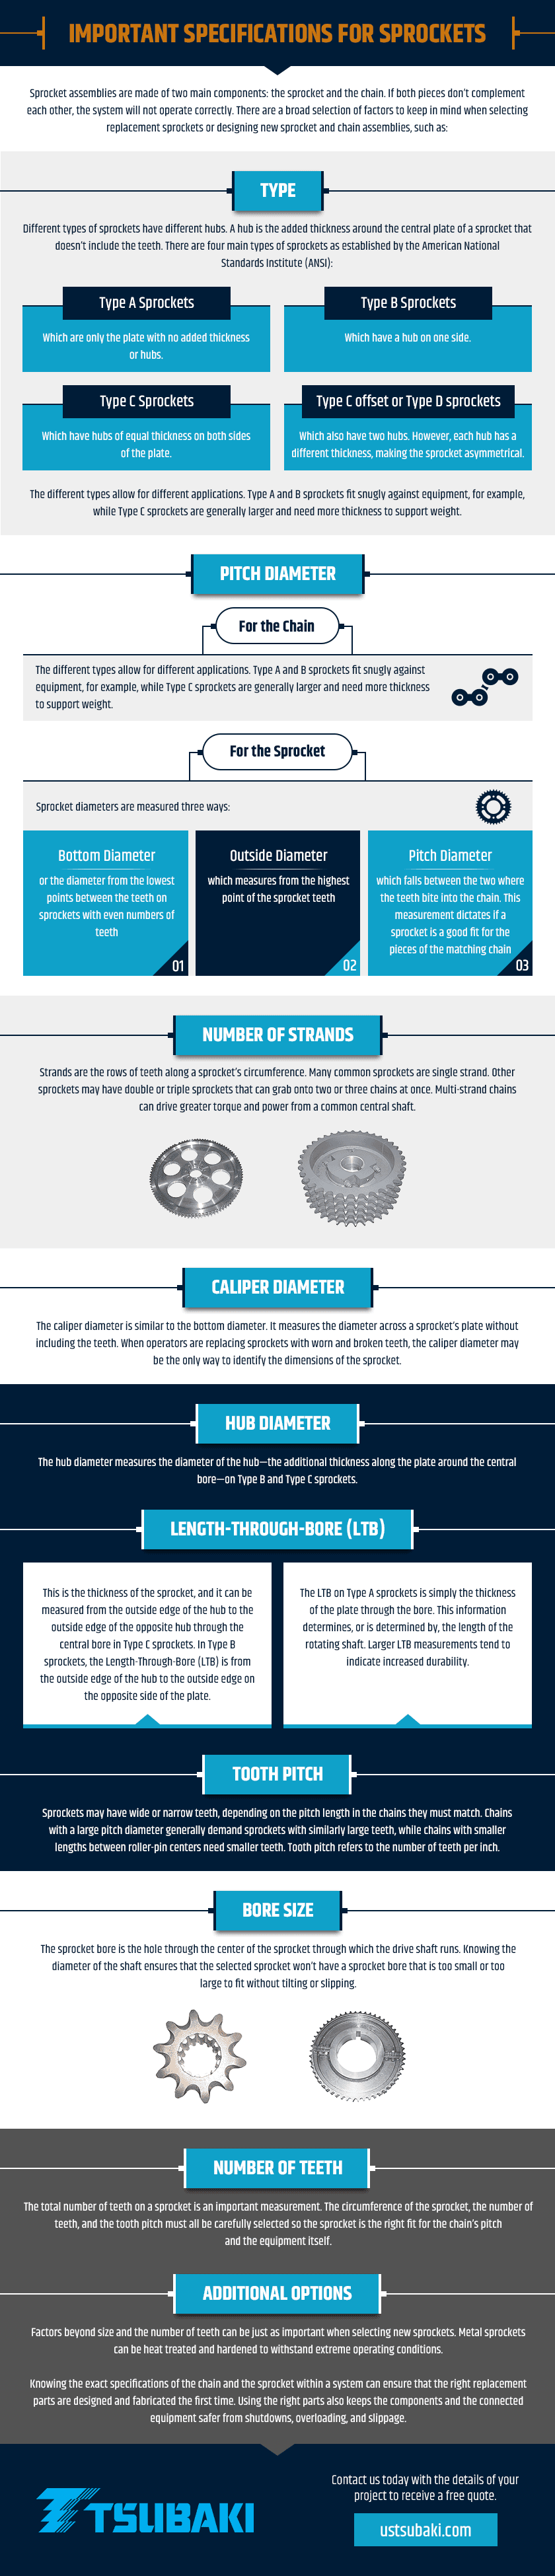 sprocket specifications infographic